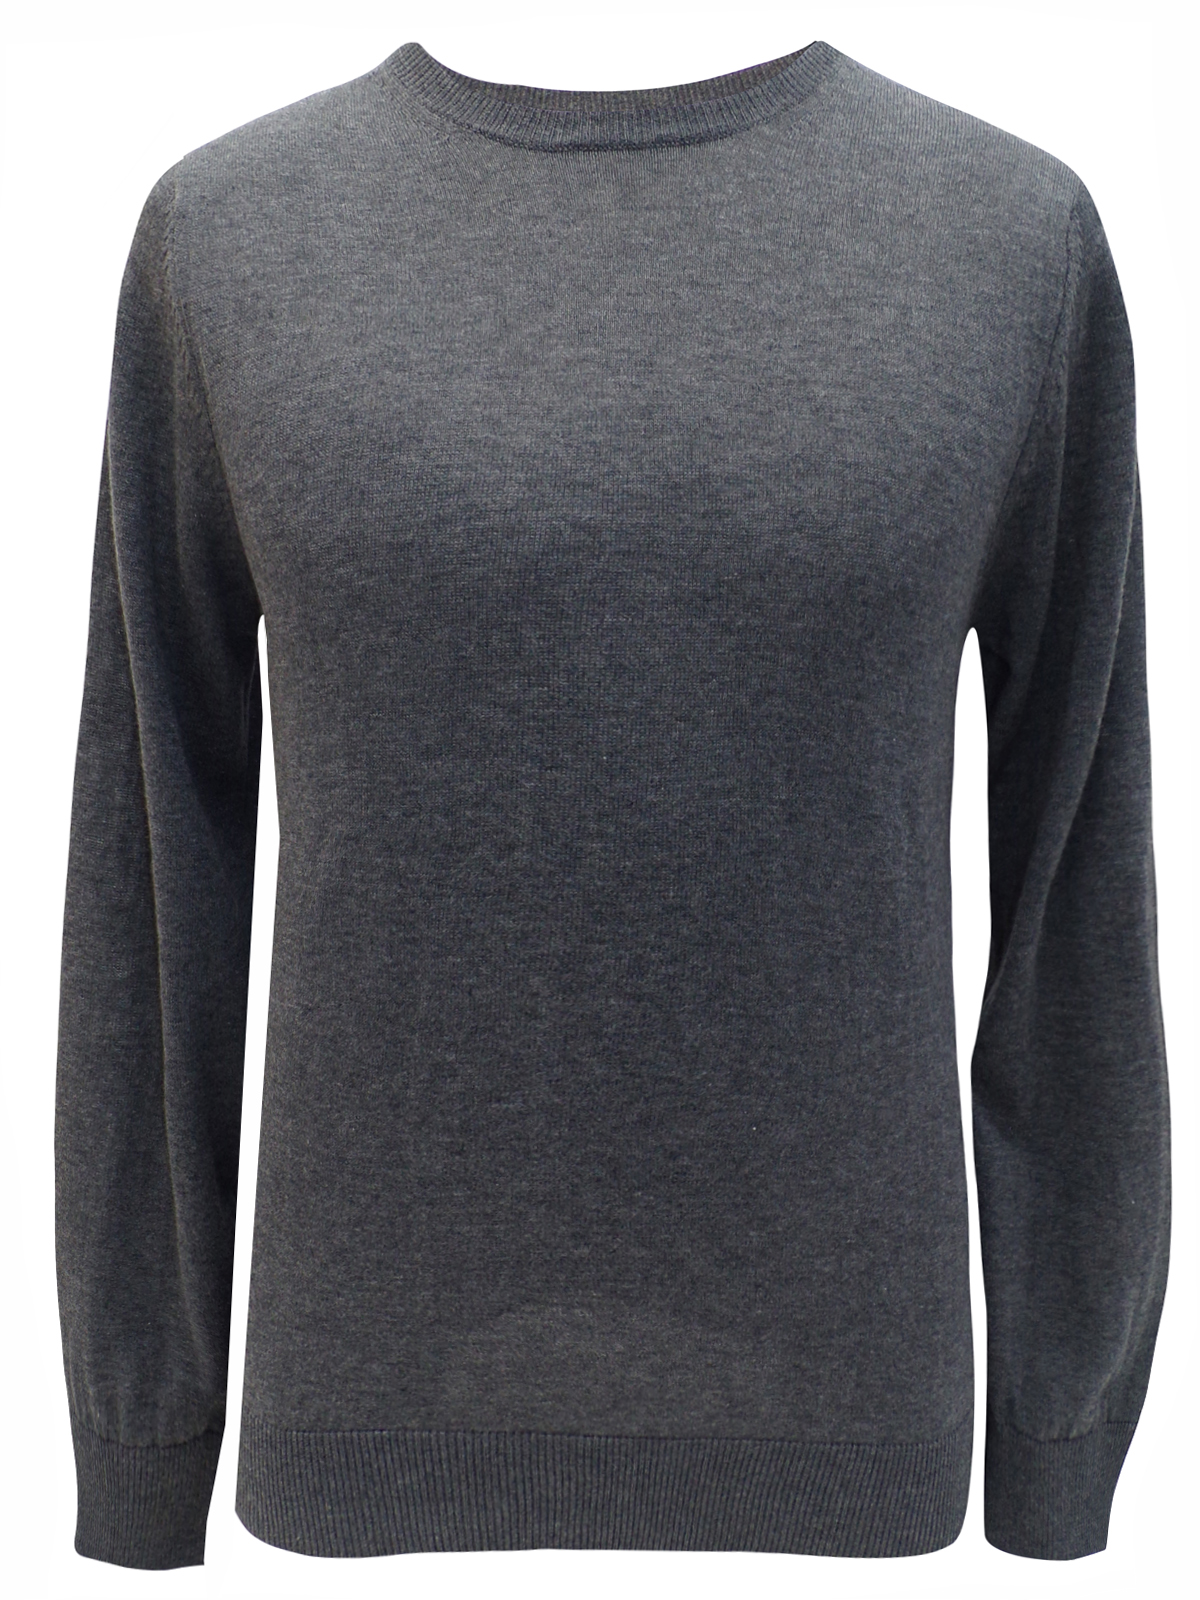 Marks and Spencer - - M&5 GREY Crew Neck Jumper - Size Medium to Large